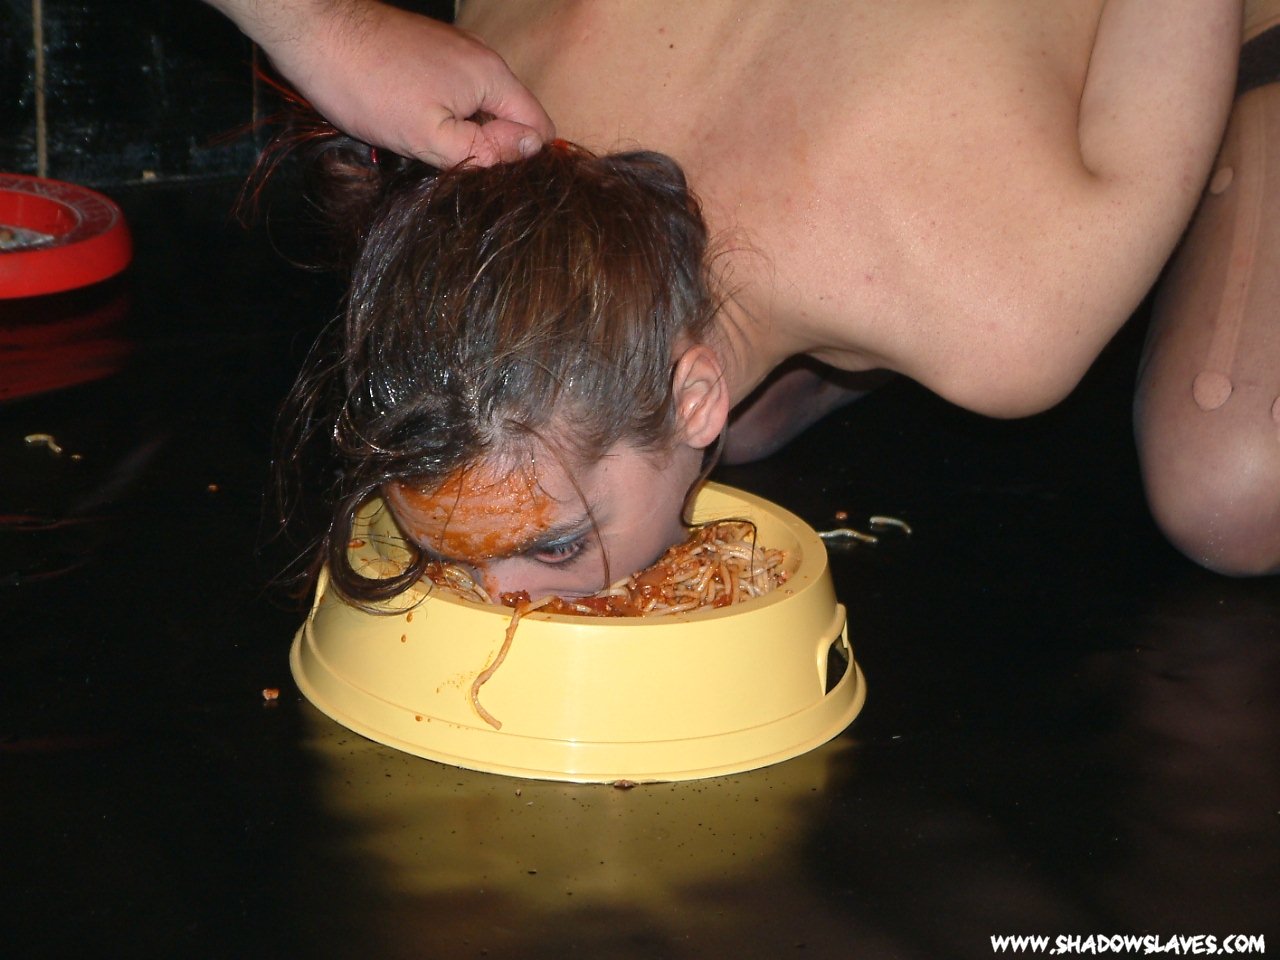 Bizarre female humiliation and messy degradation of food